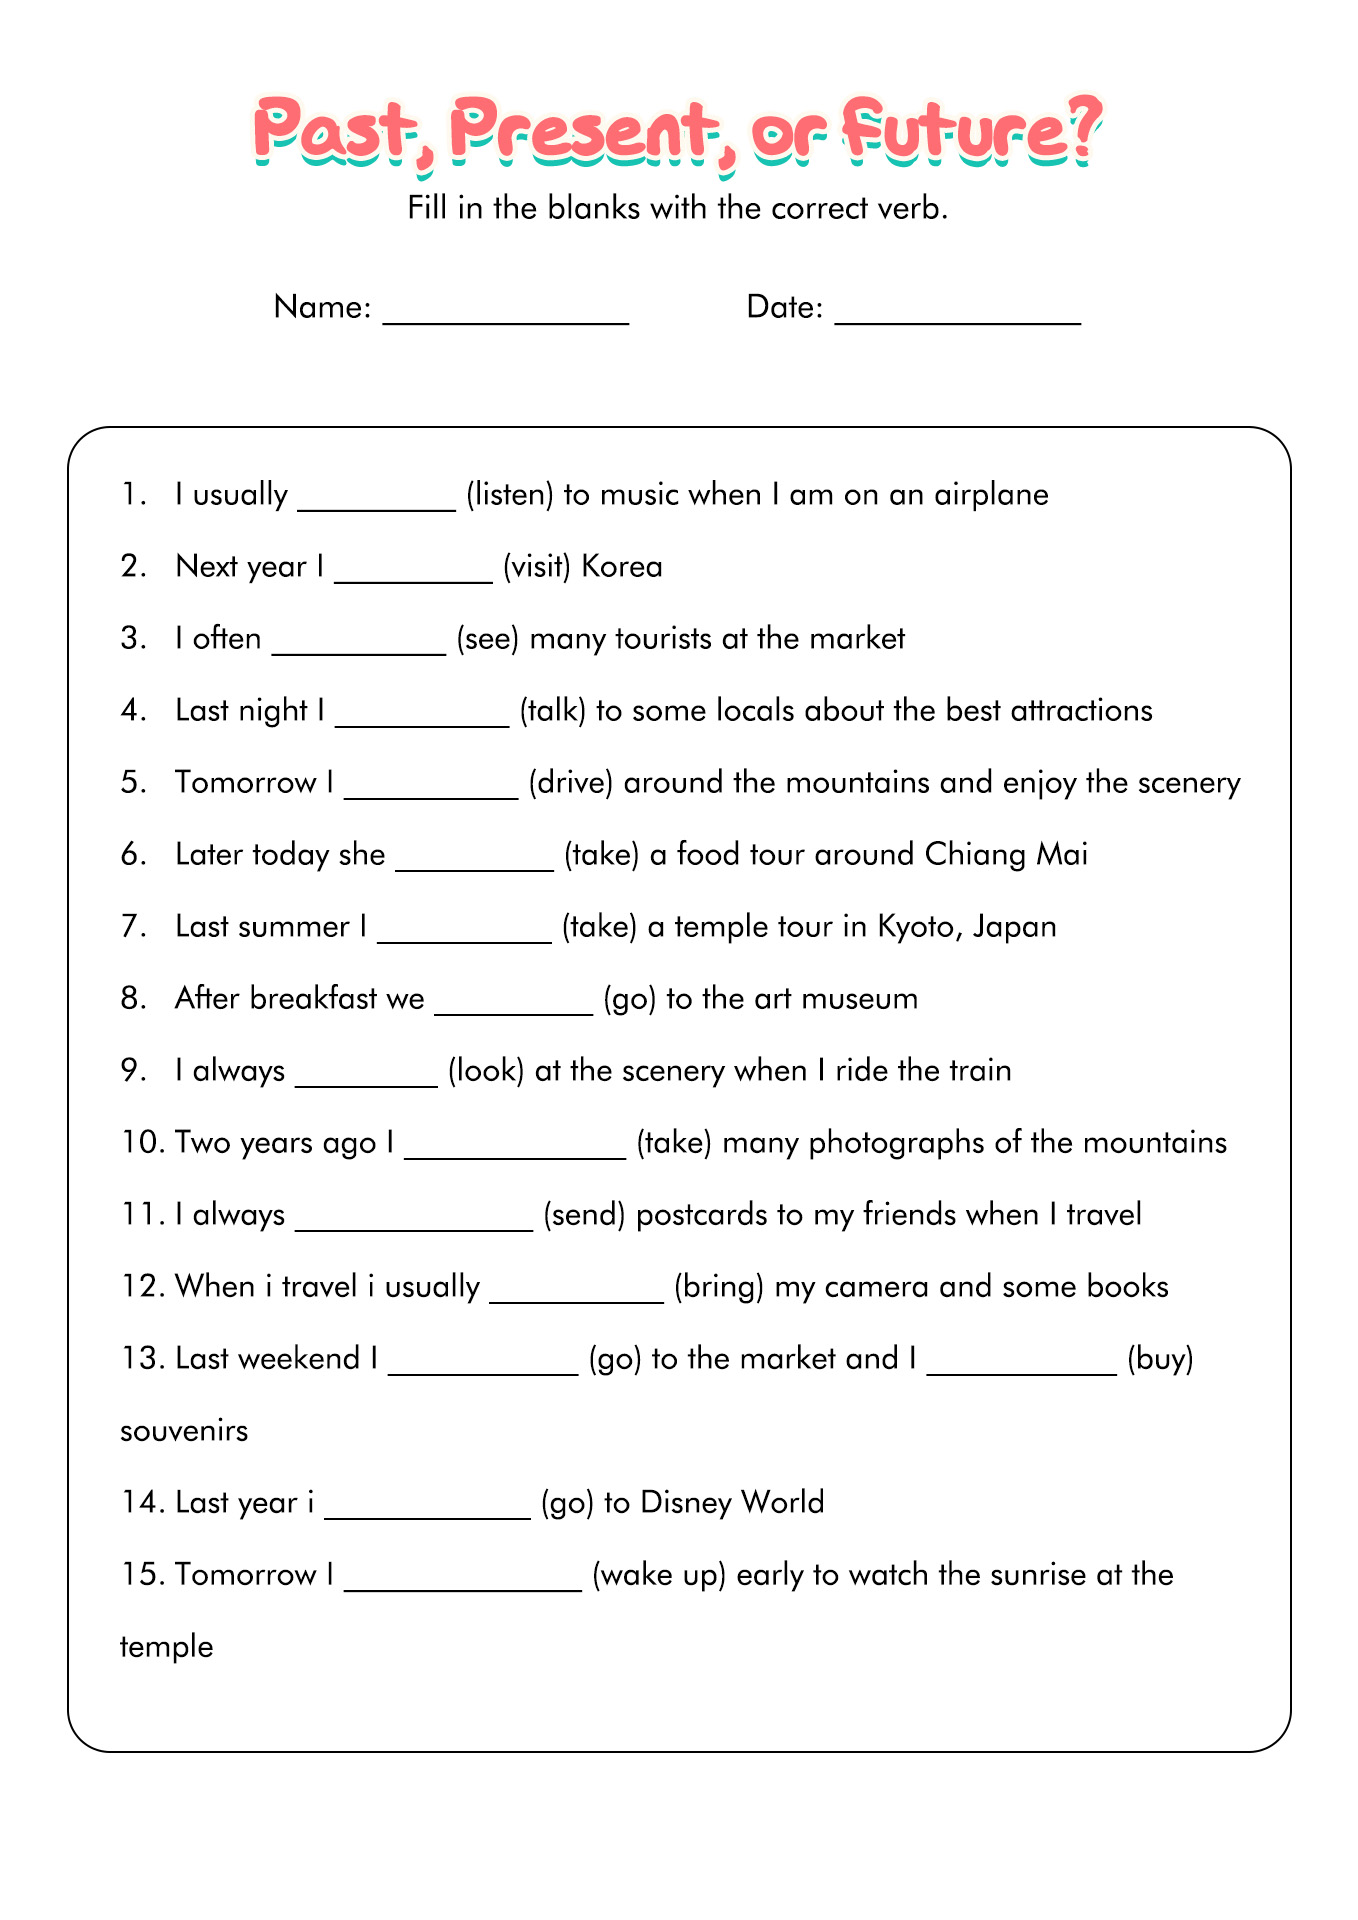 Past Present and Future Tense Worksheets Image